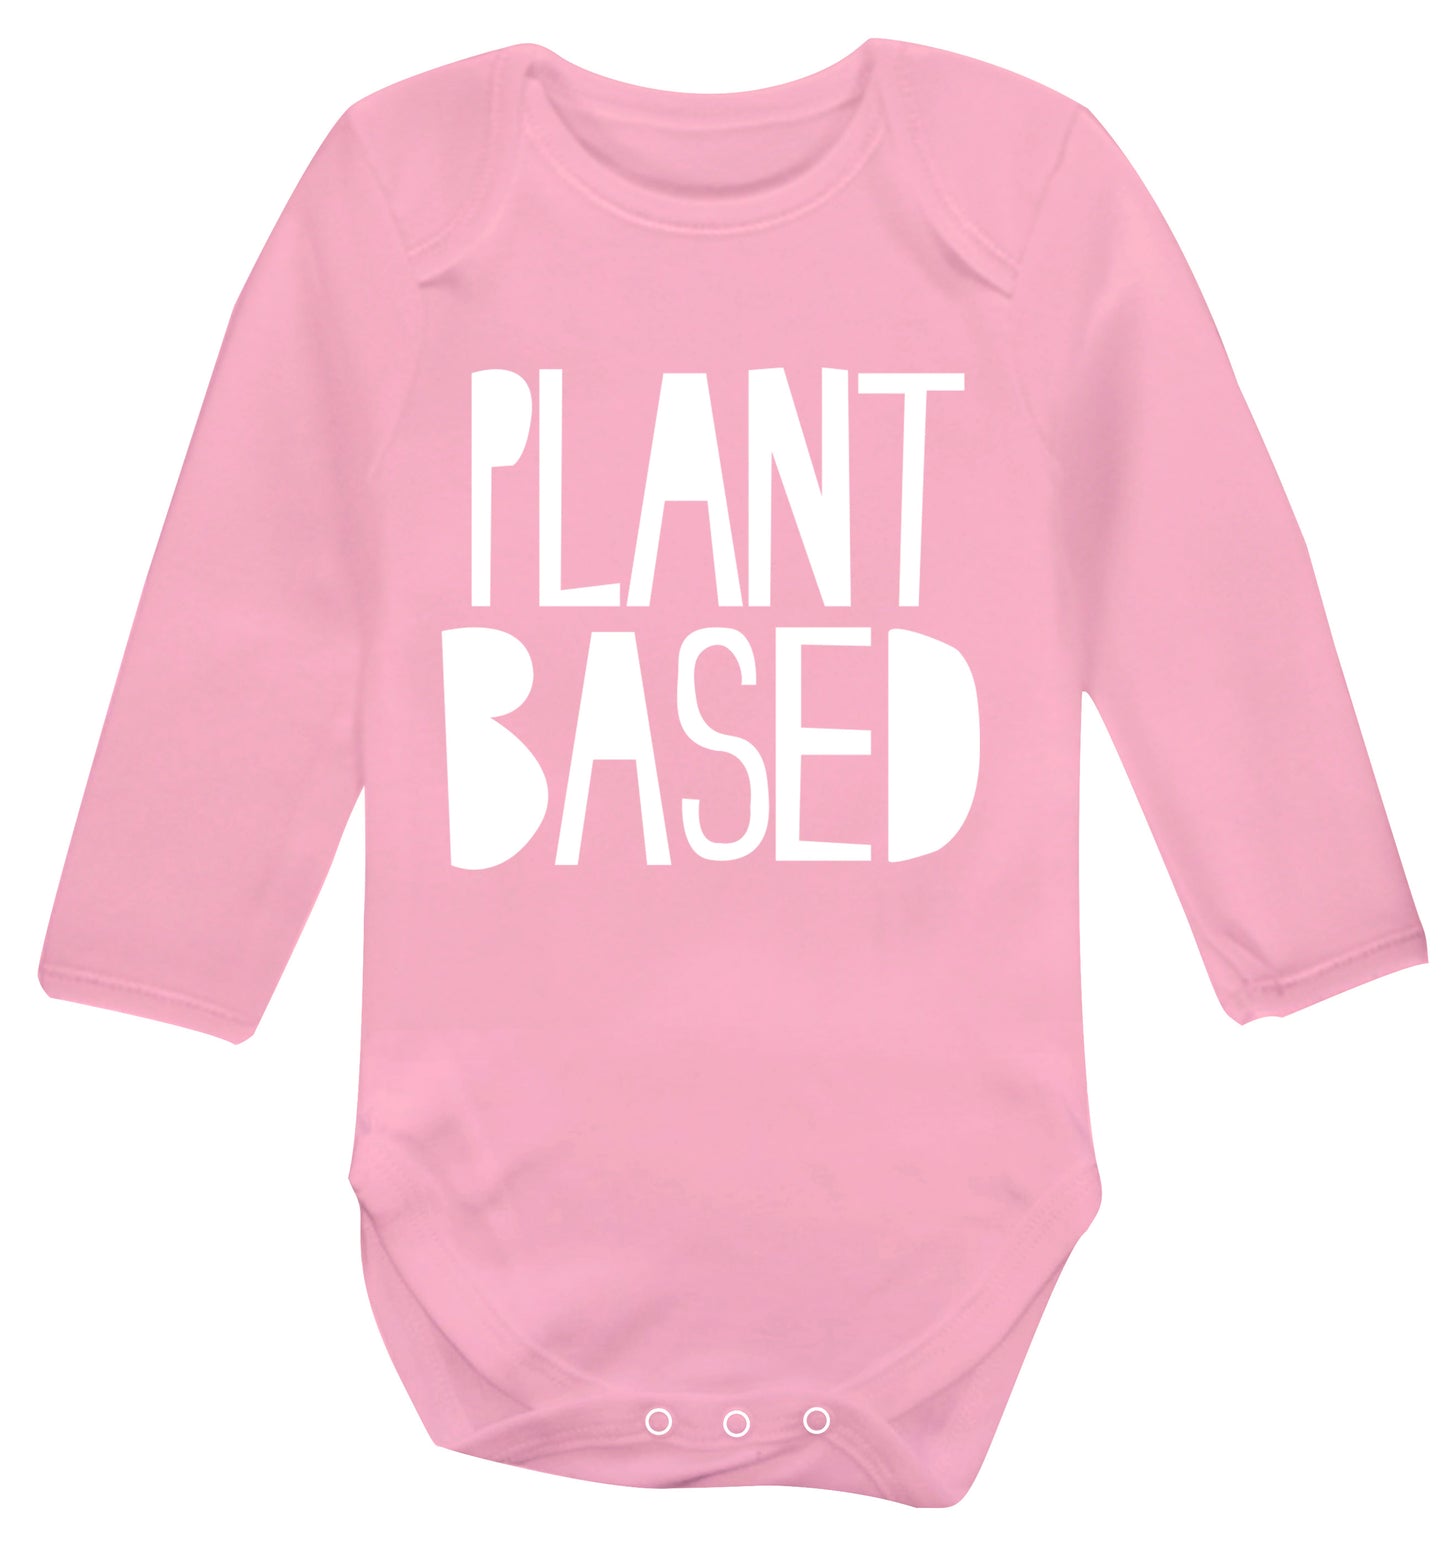 Plant Based Baby Vest long sleeved pale pink 6-12 months